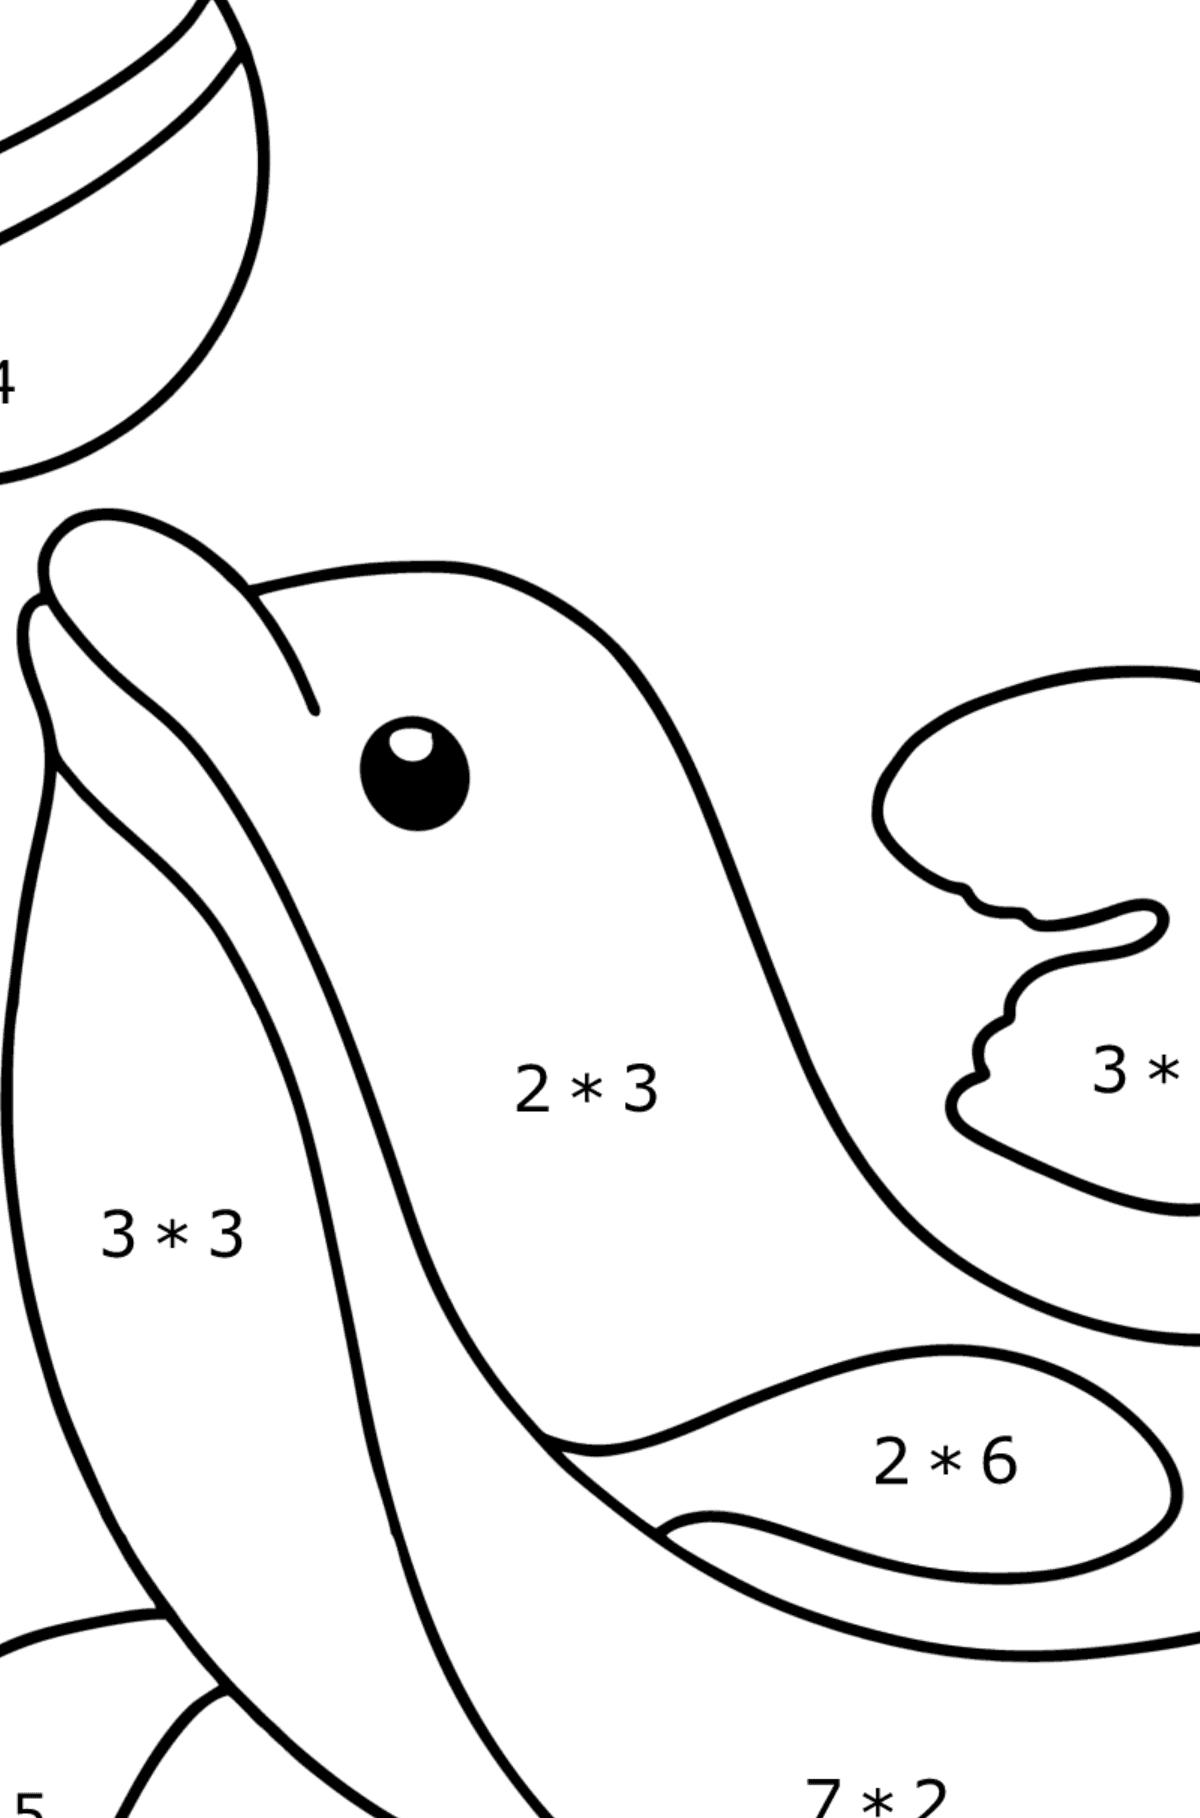 Dolphin is Performing coloring page - Math Coloring - Multiplication for Kids